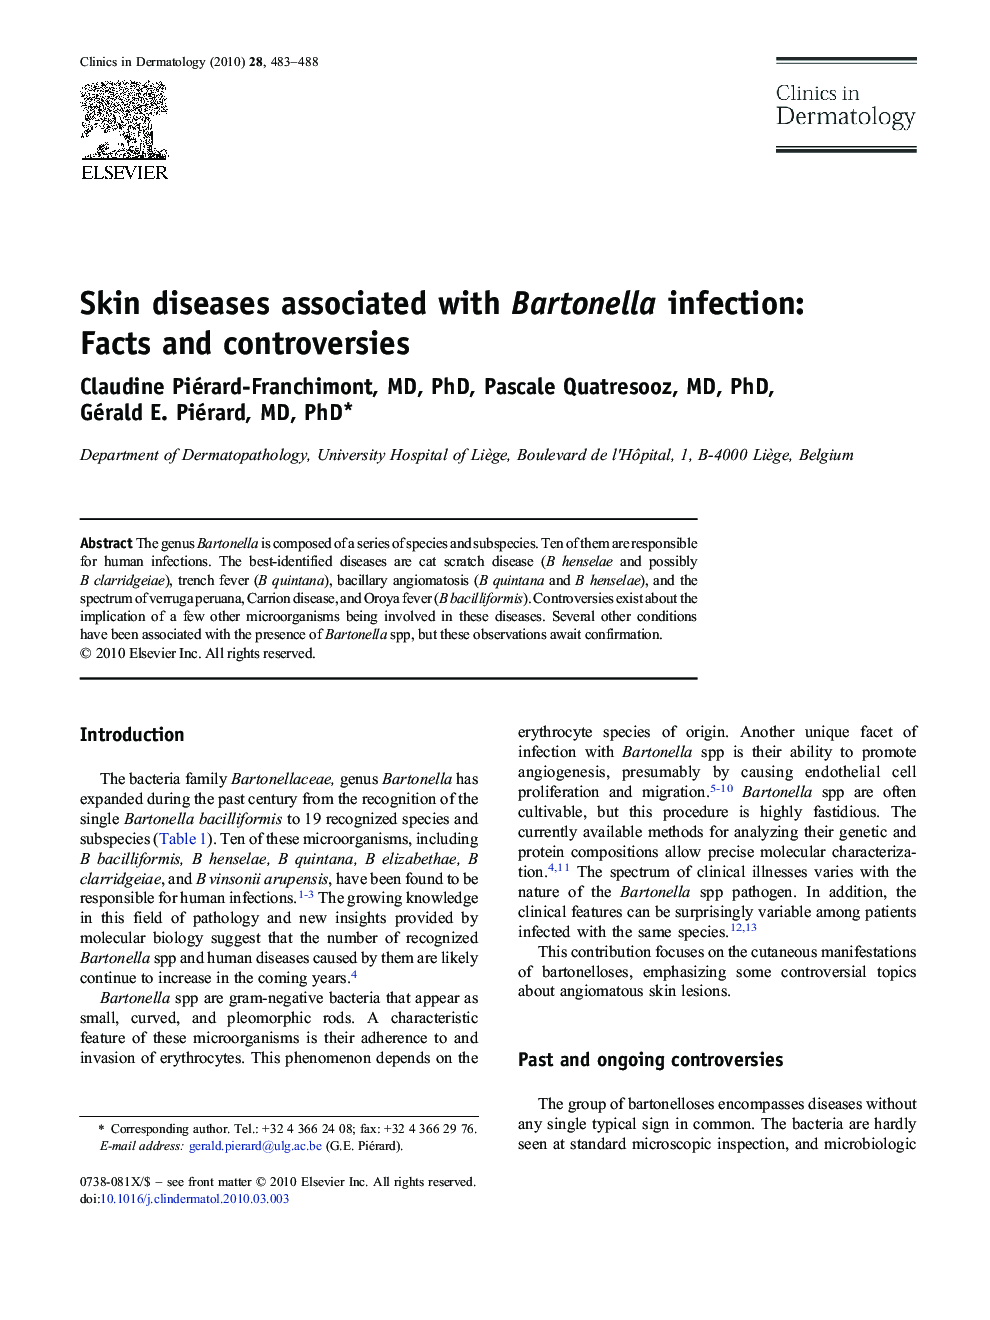 Skin diseases associated with Bartonella infection: Facts and controversies